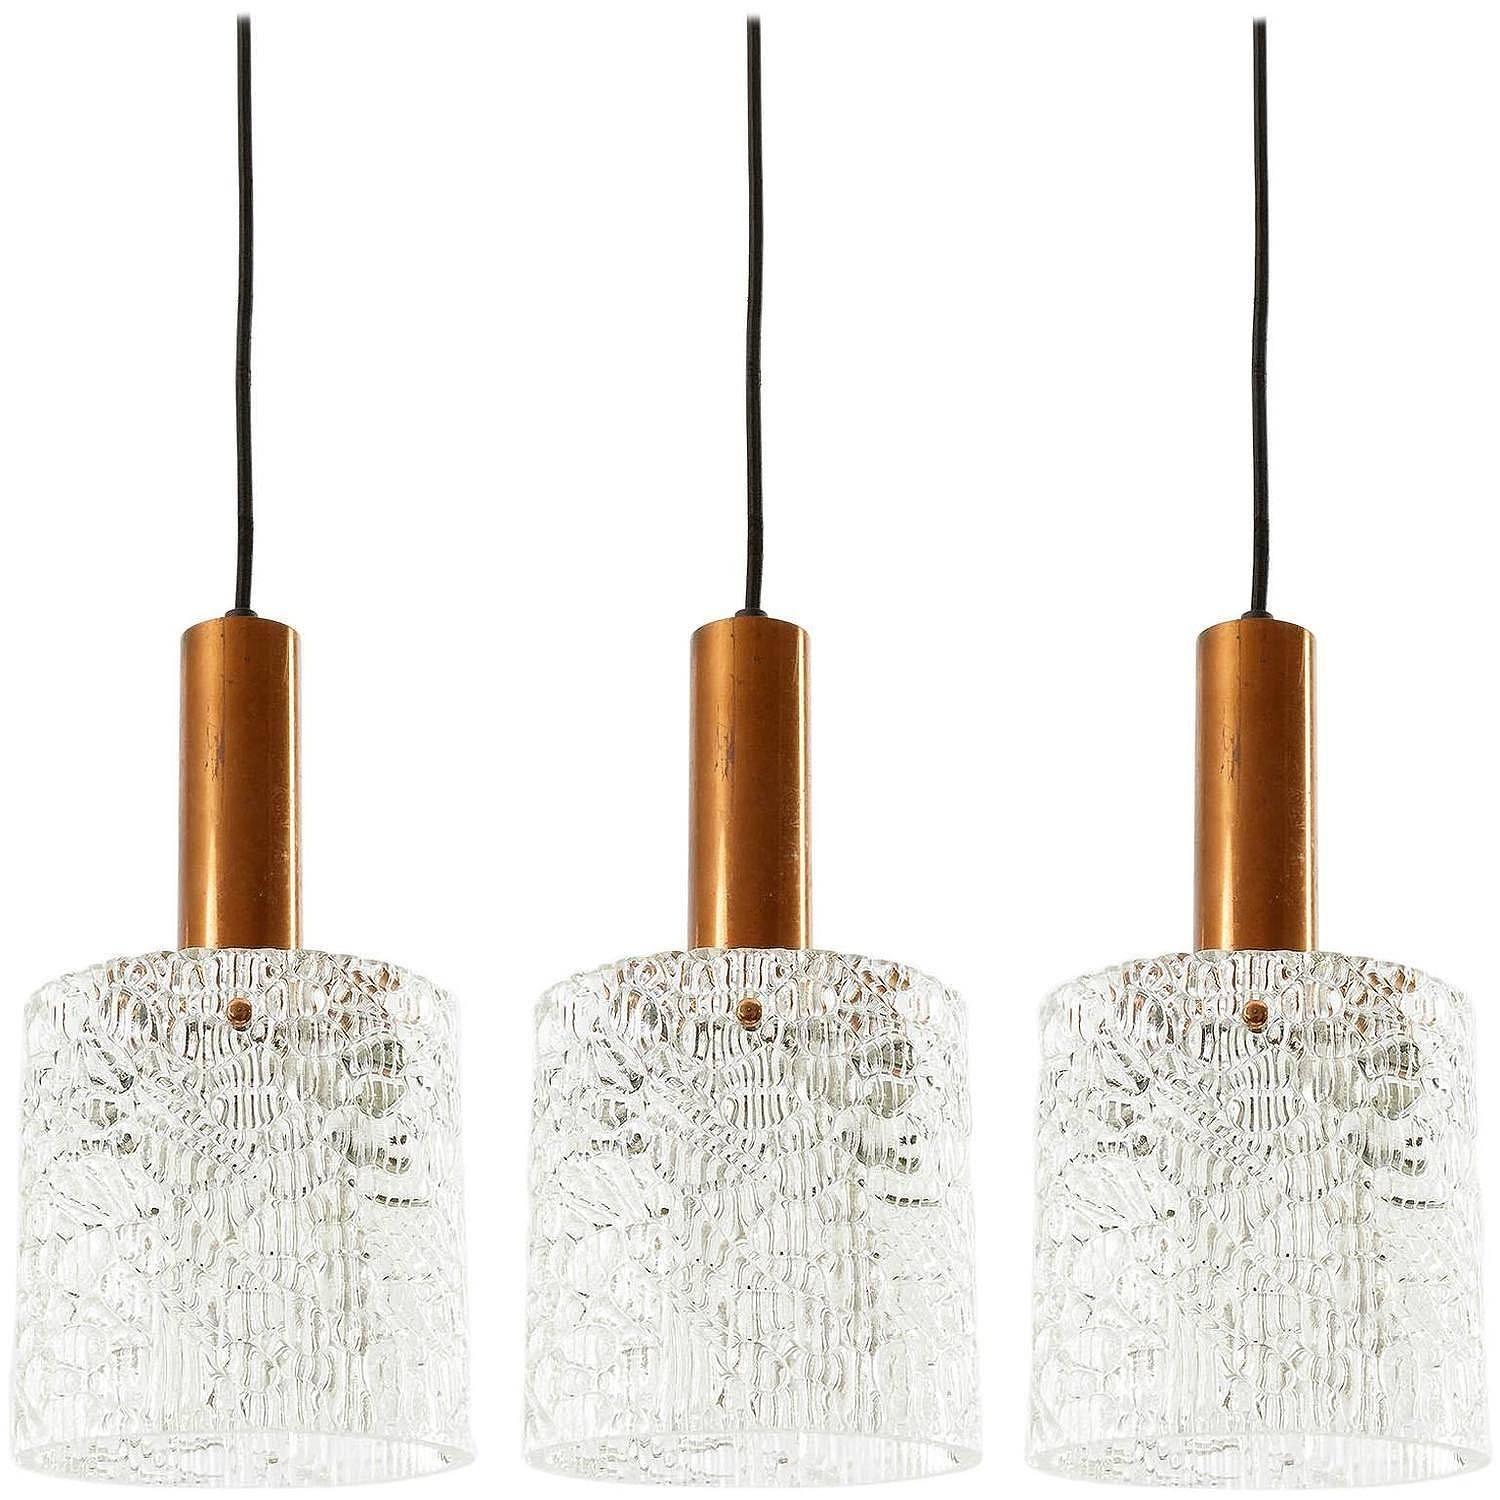 One of Six Kalmar Pendant Lights, Textured Glass and Patinated Copper, 1950s